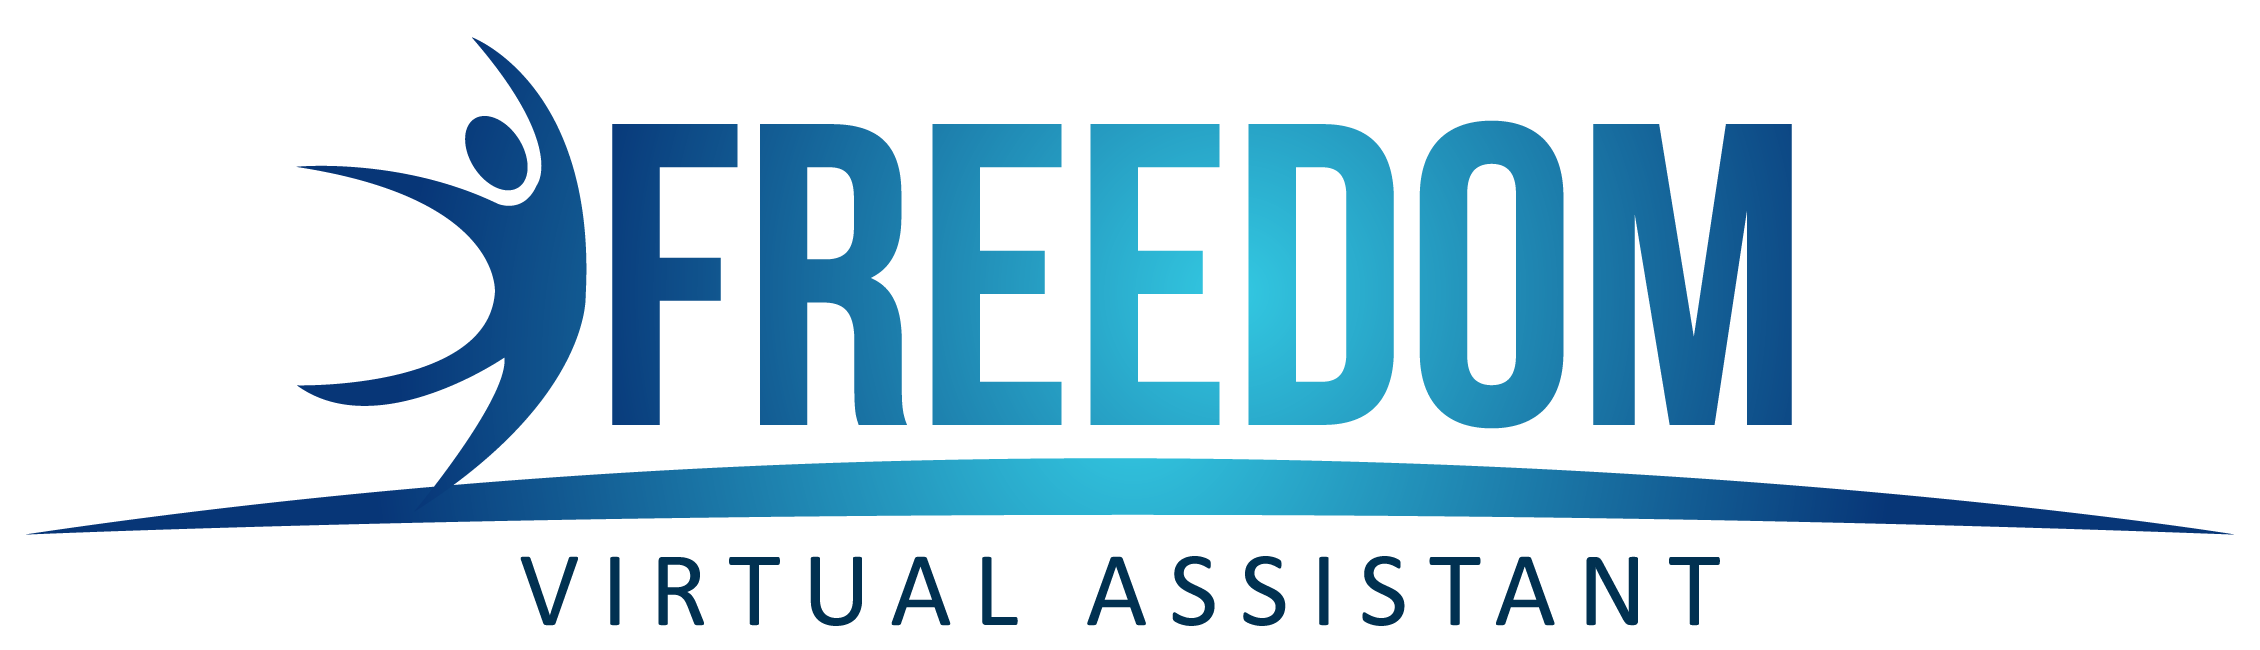 Freedom Virtual Assistant